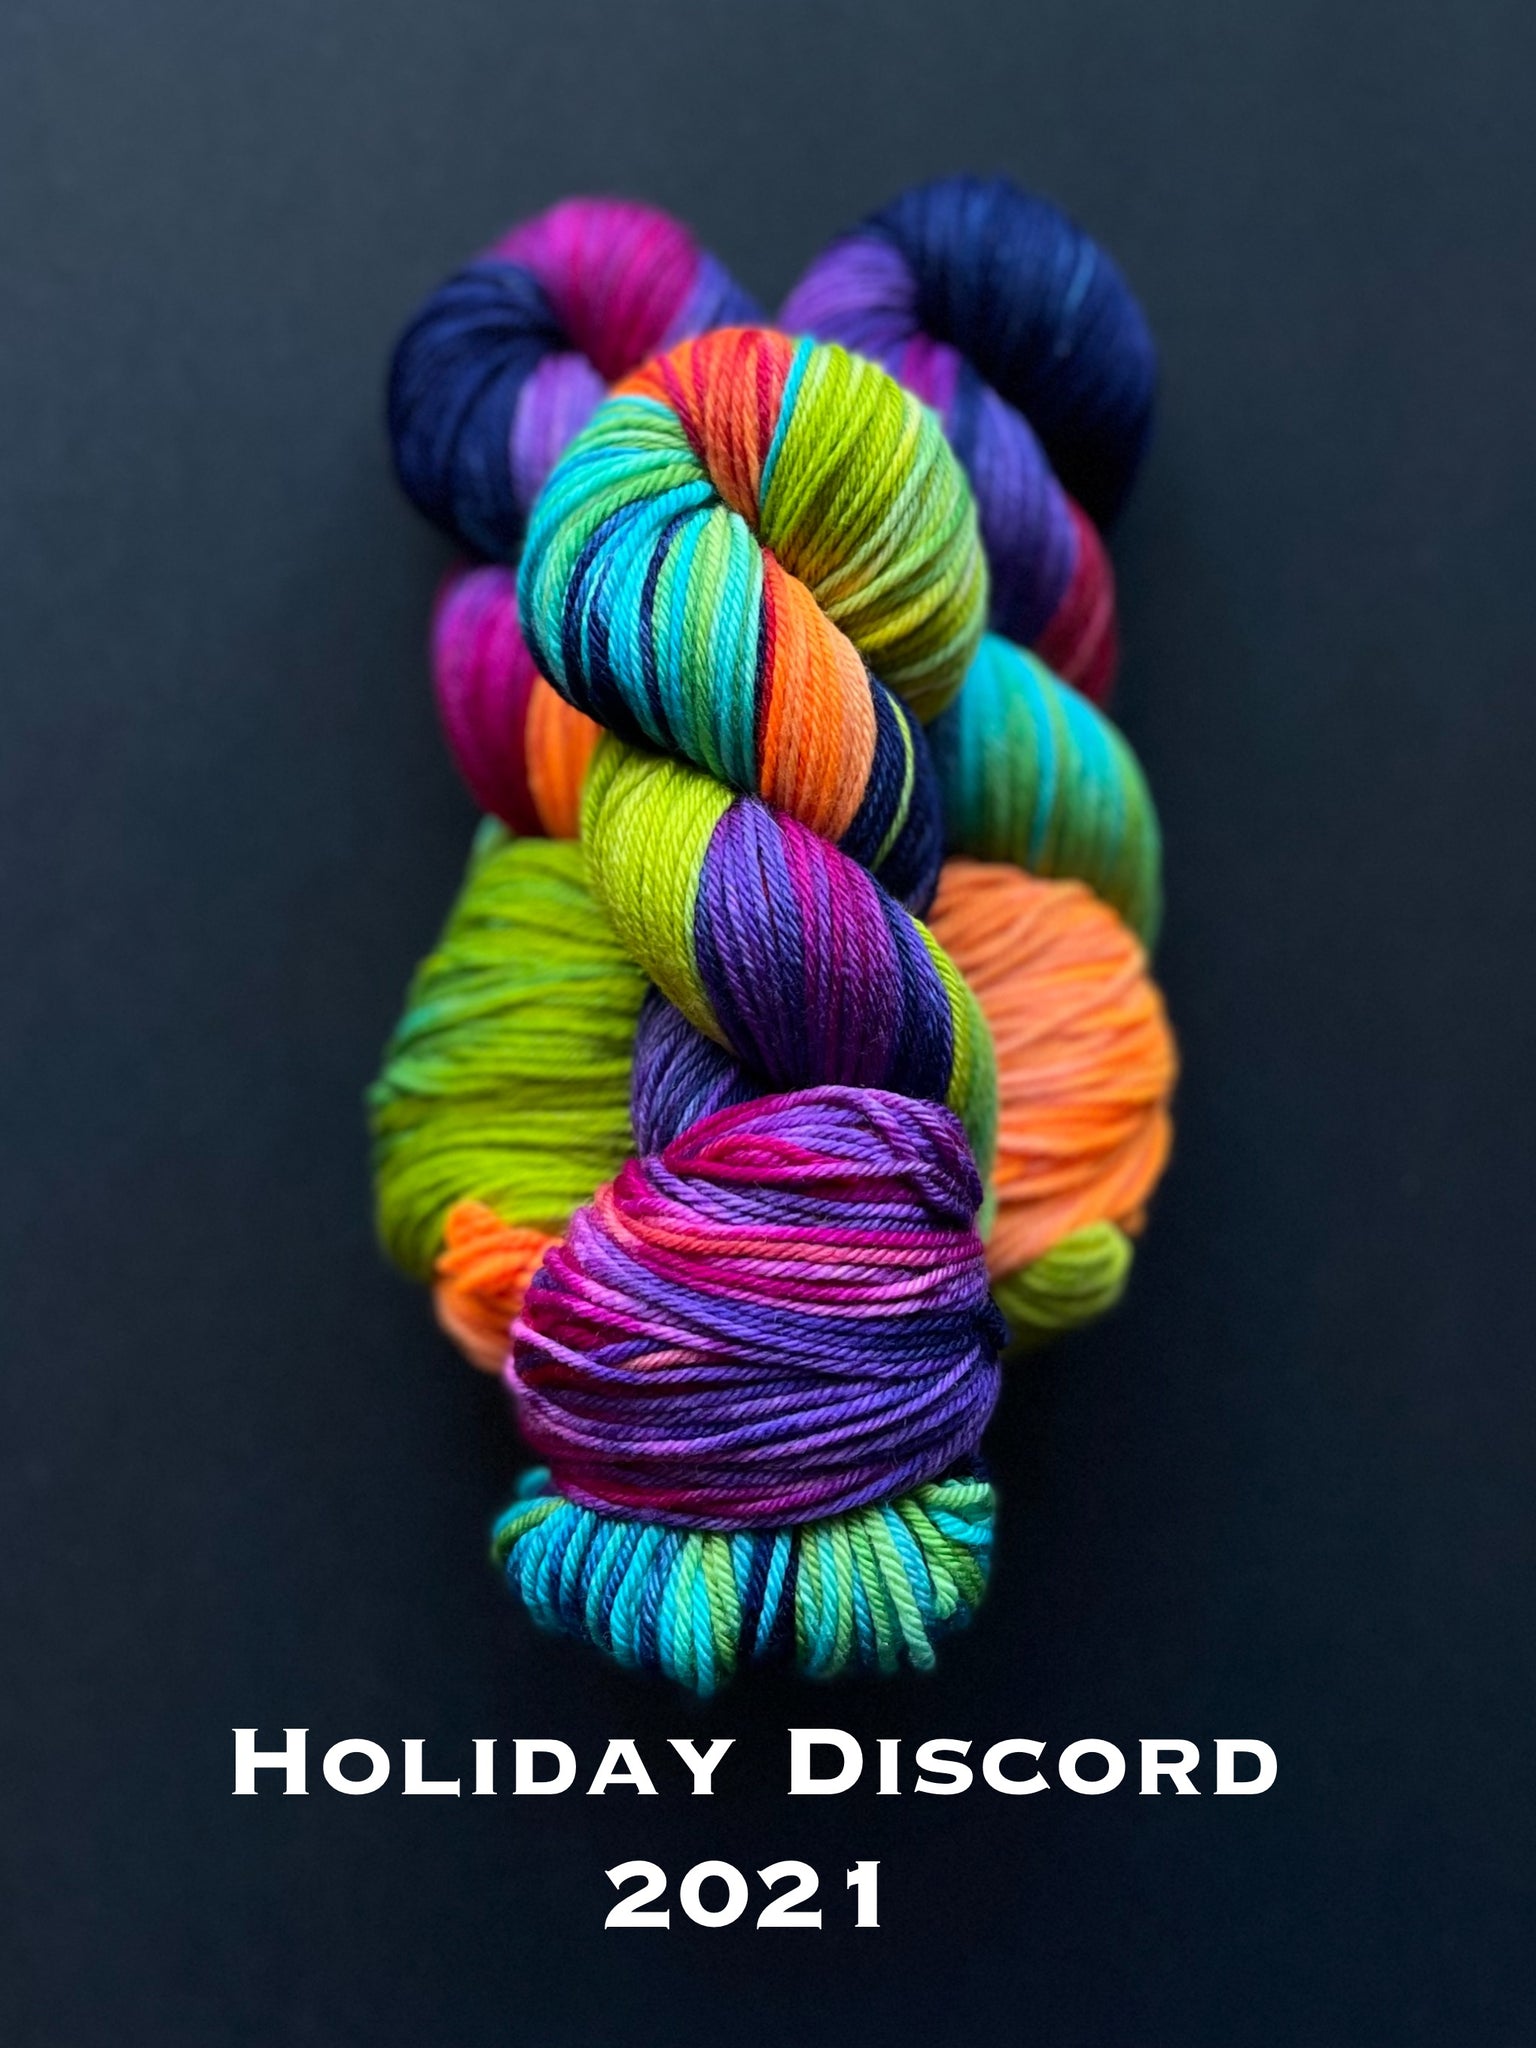 Holiday Discord 2021 (VKL Choose Your Own Adventure - November 2020)